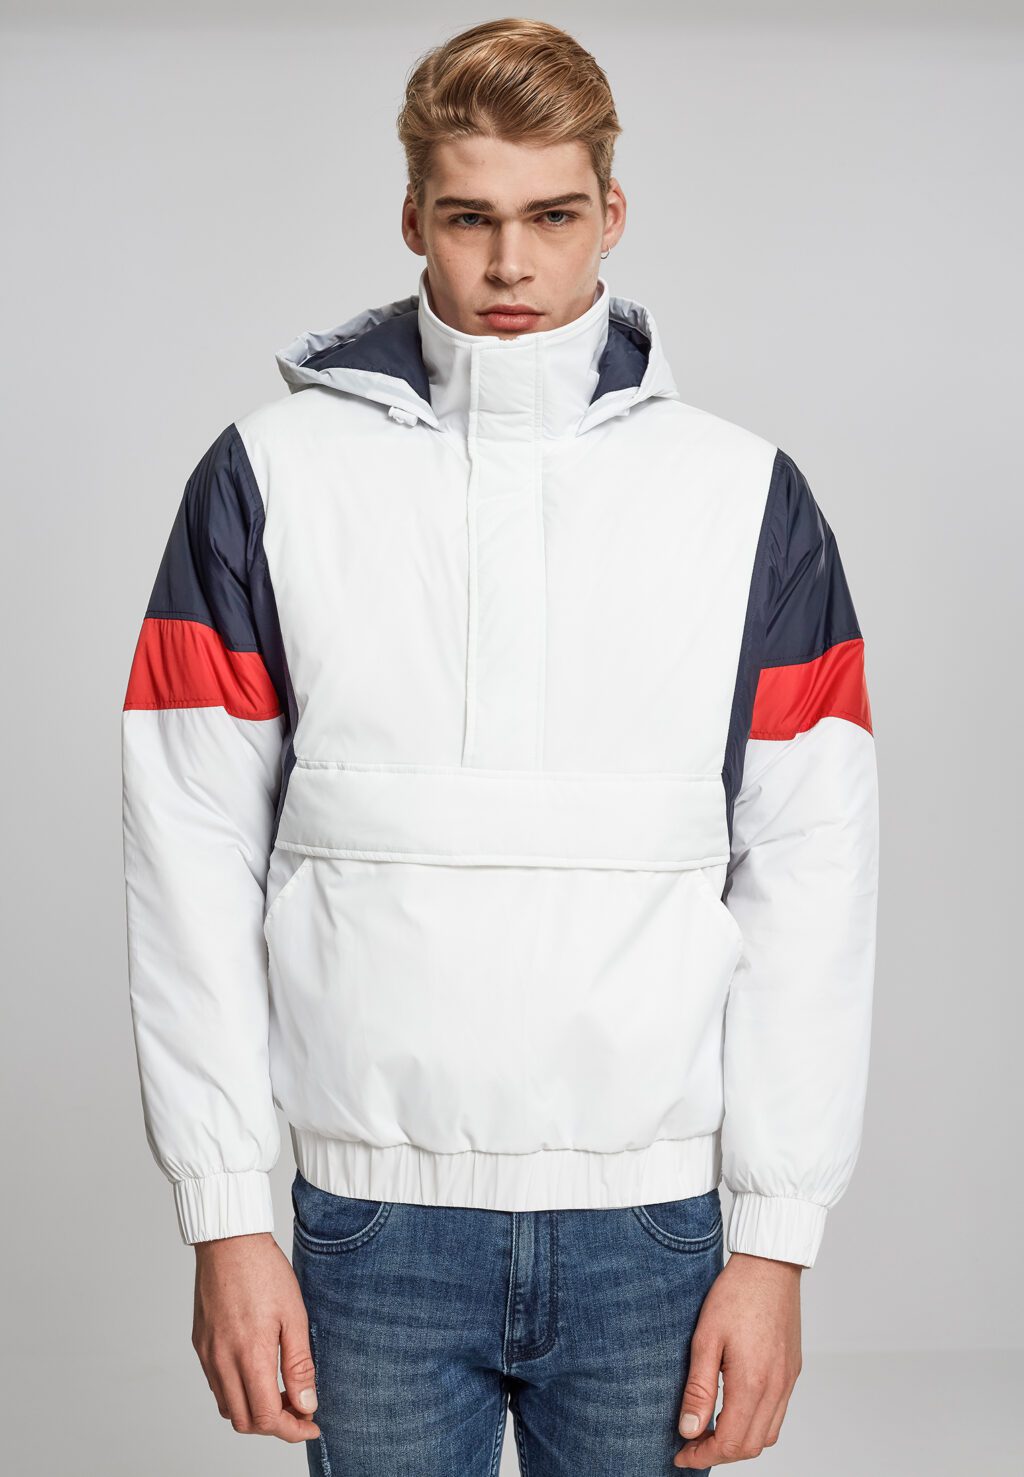 Urban Classics 3-Tone Pull Over Jacket white/navy/fire red TB1881